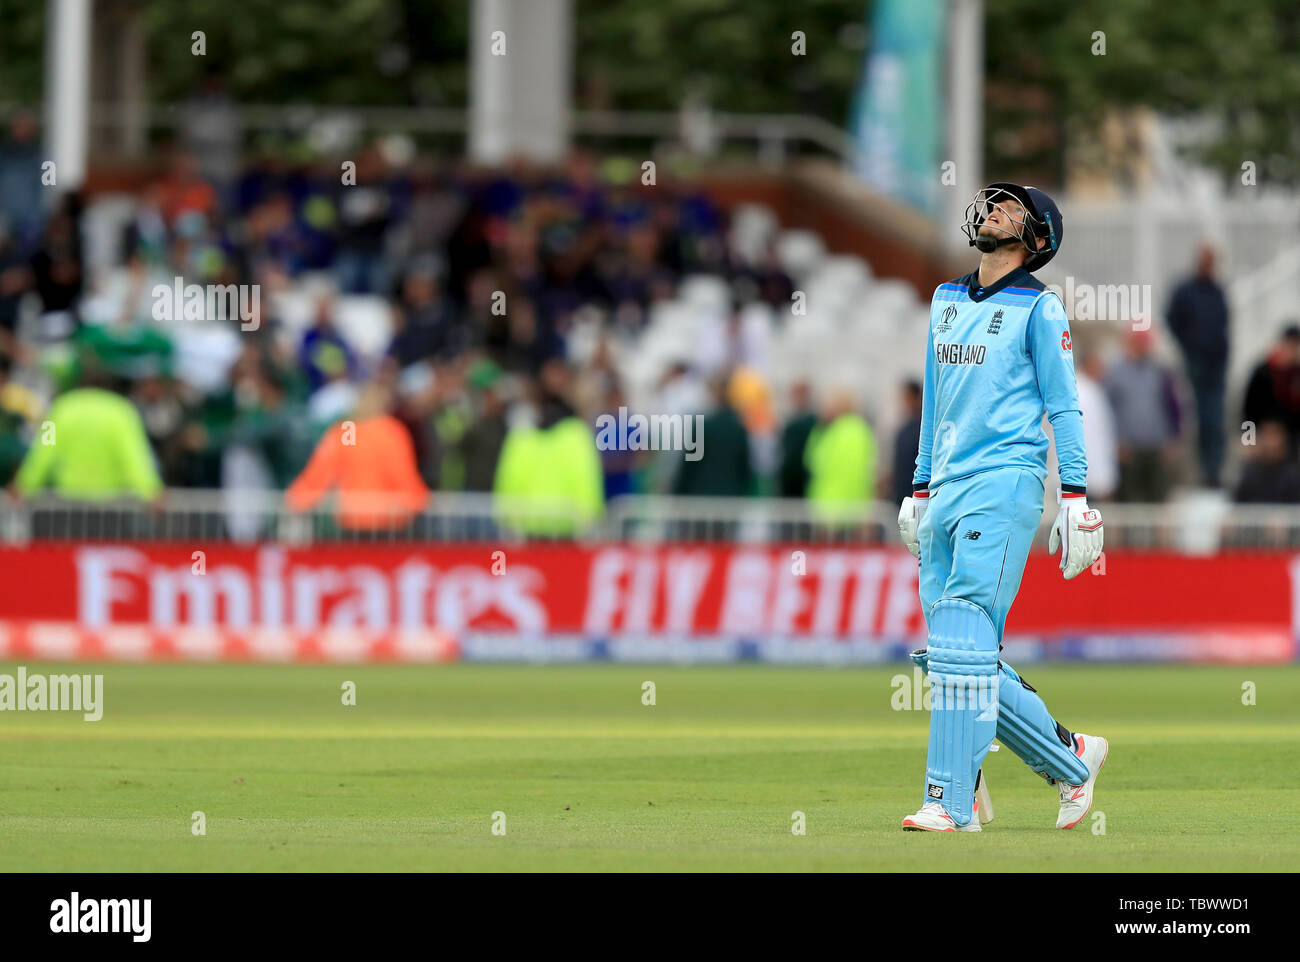 England's Joe Root appears dejected after being dismissed during the ICC Cricket World Cup group stage match at Trent Bridge, Nottingham. Stock Photo